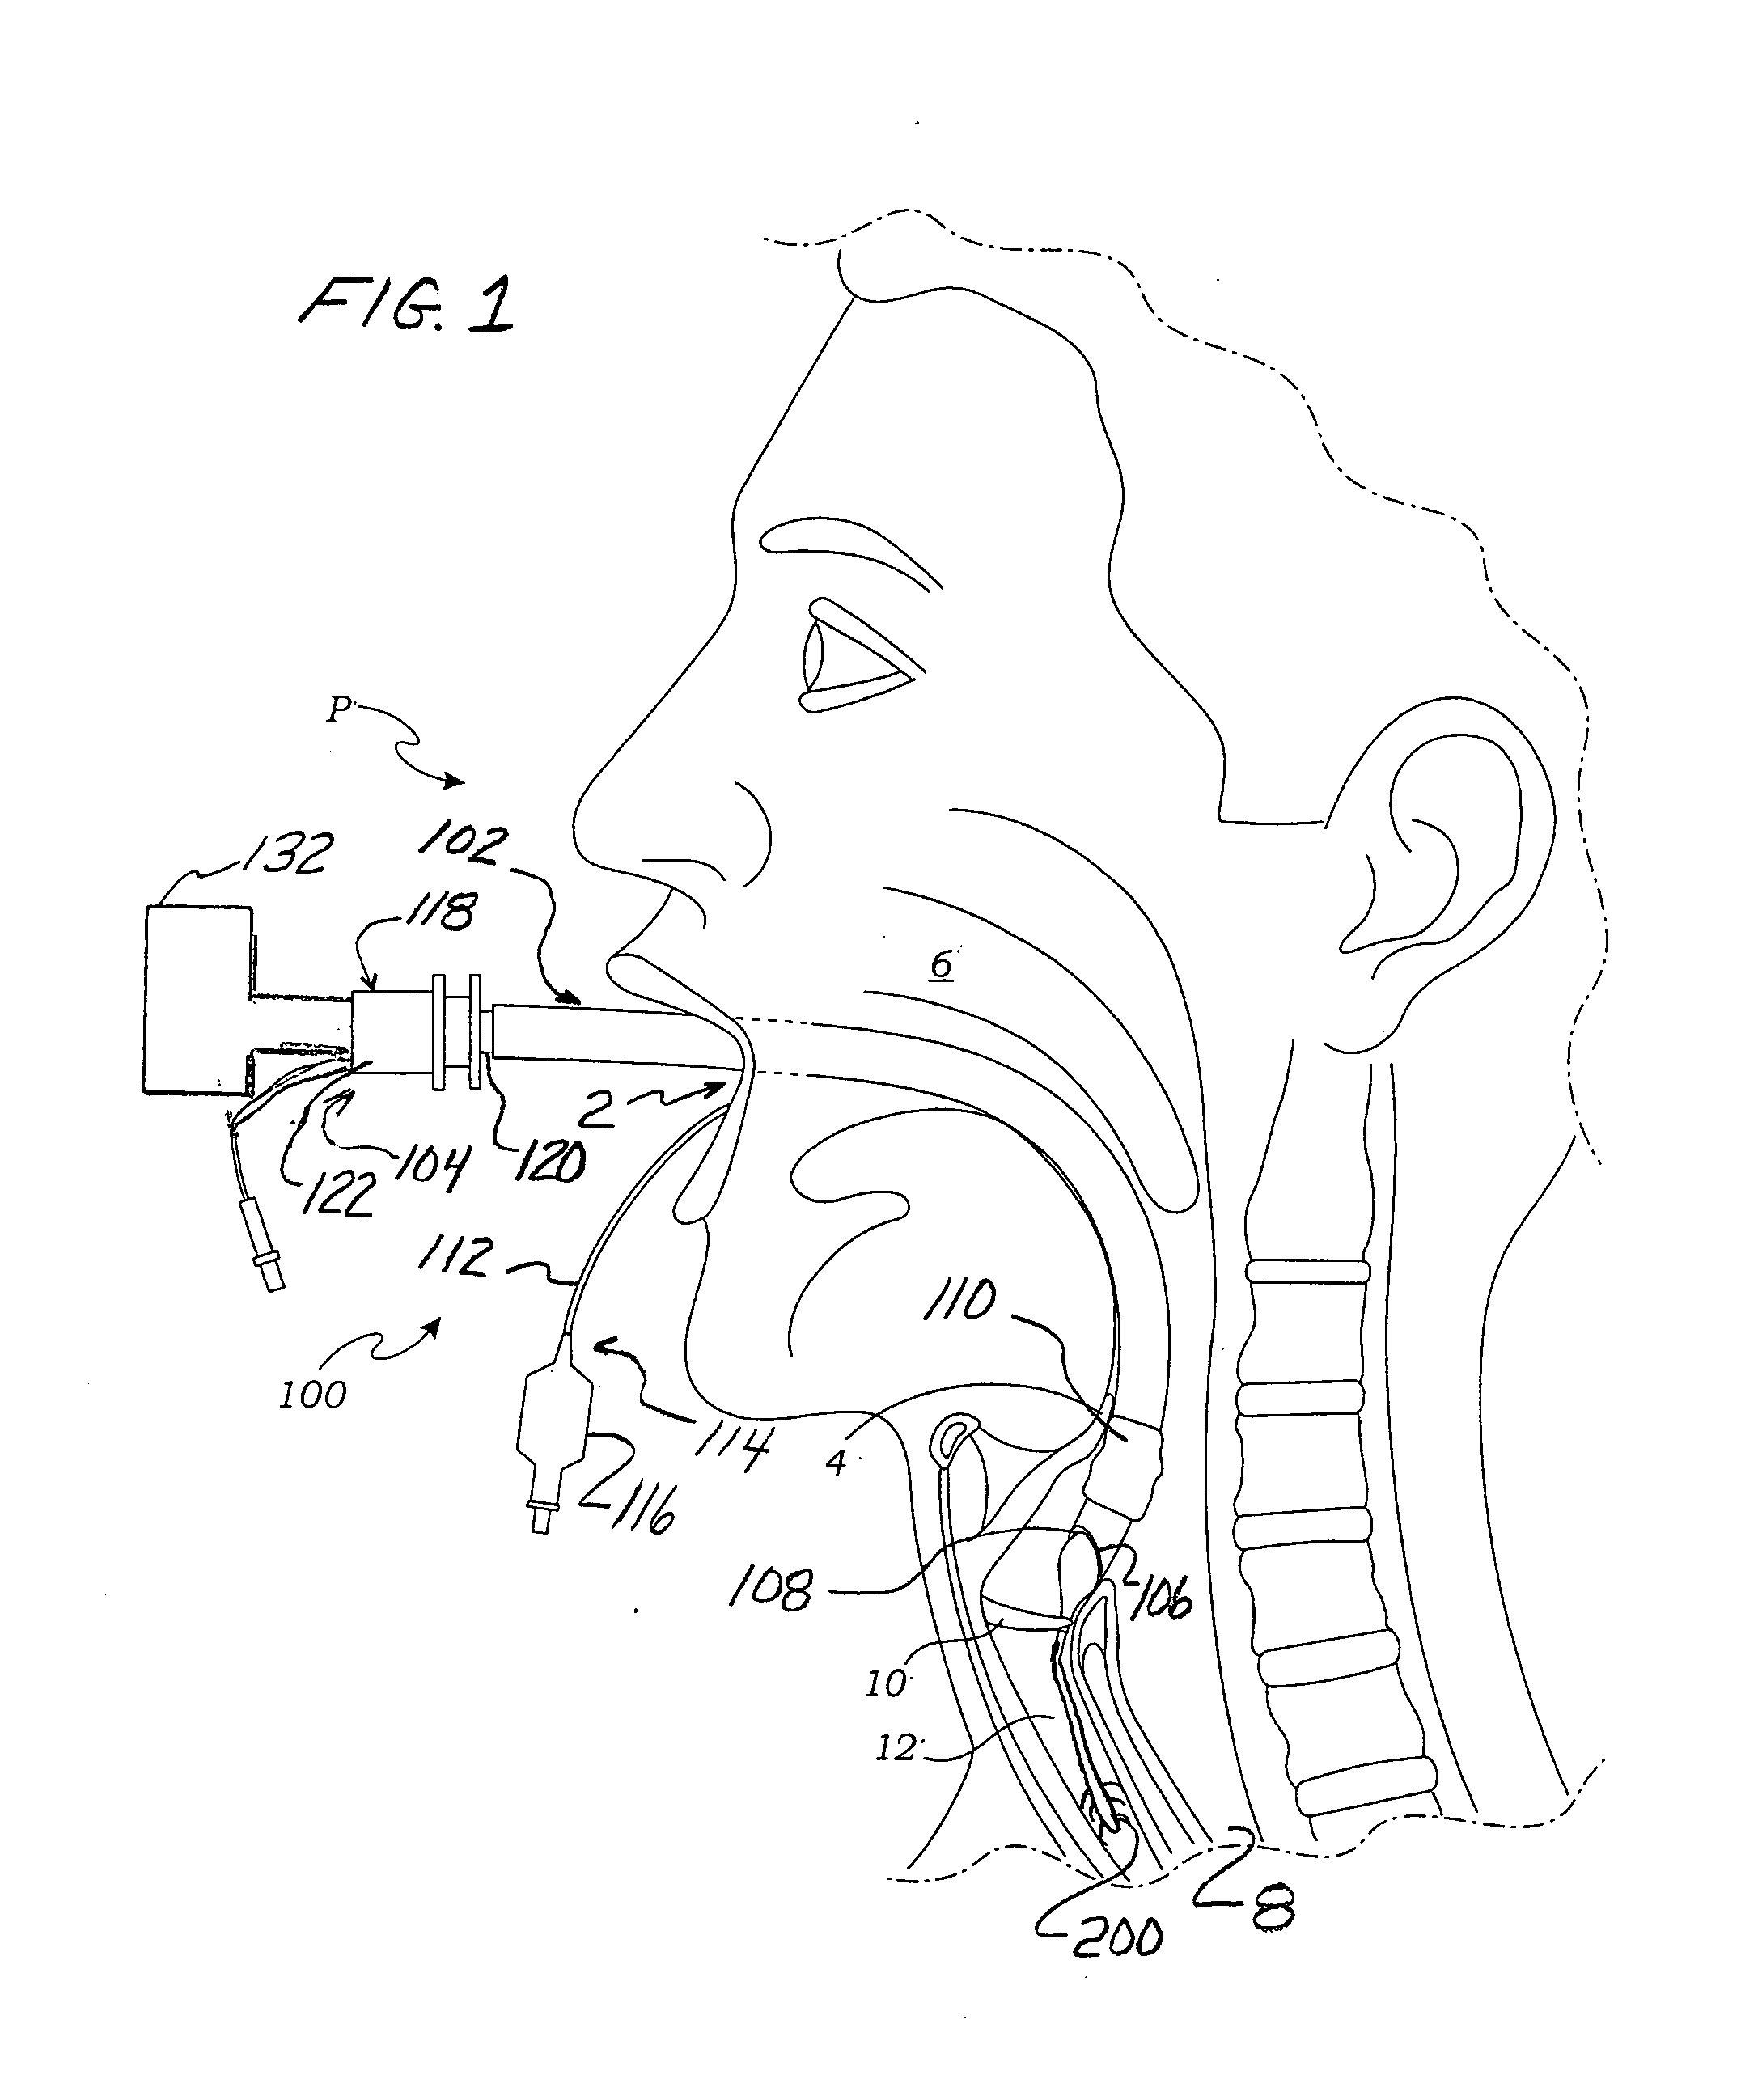 Method and device for placing an endotracheal tube